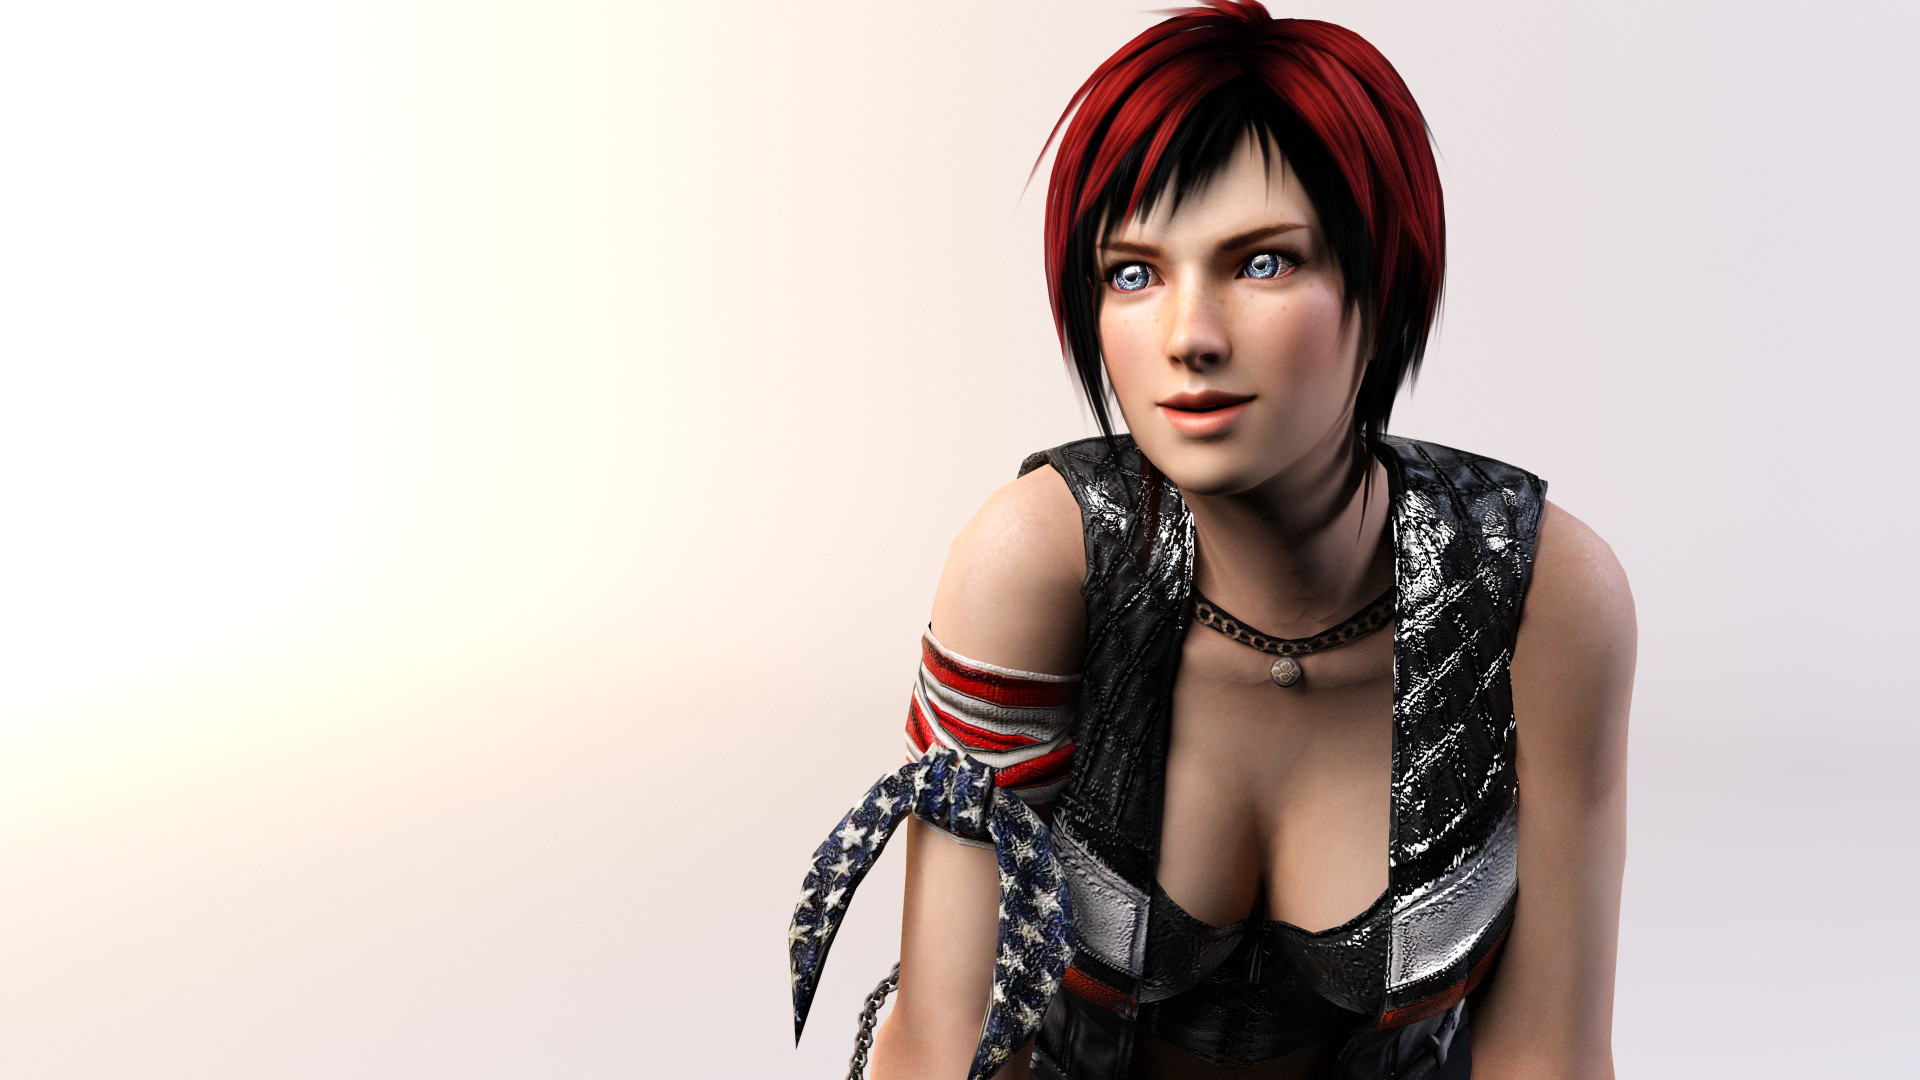 1920x1080 ... SilverMoonCrystal 3DS Max - Mila Render 2 by SilverMoonCrystal